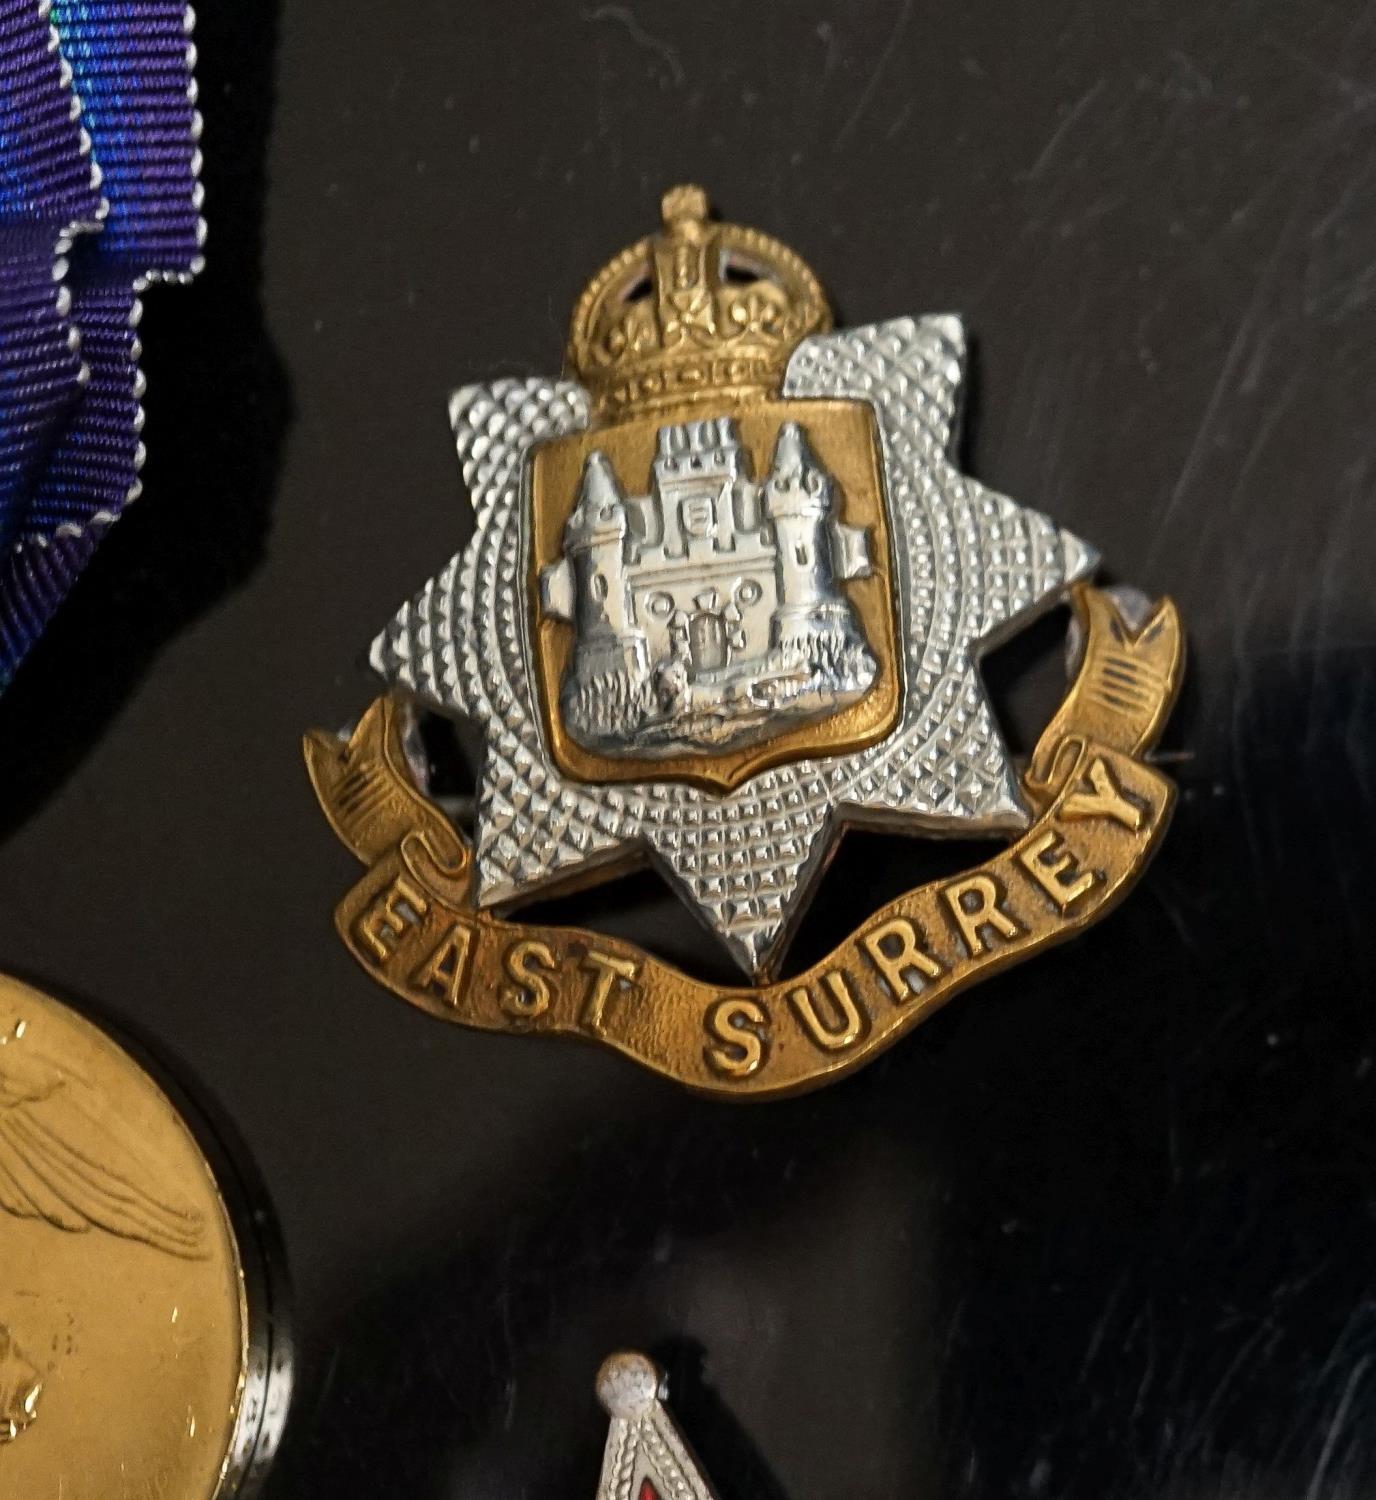 A WWI pair to 23125 PTE. H. ROFE E.SUR. R., together with an East Surrey Regiment cap badge, two - Image 3 of 4